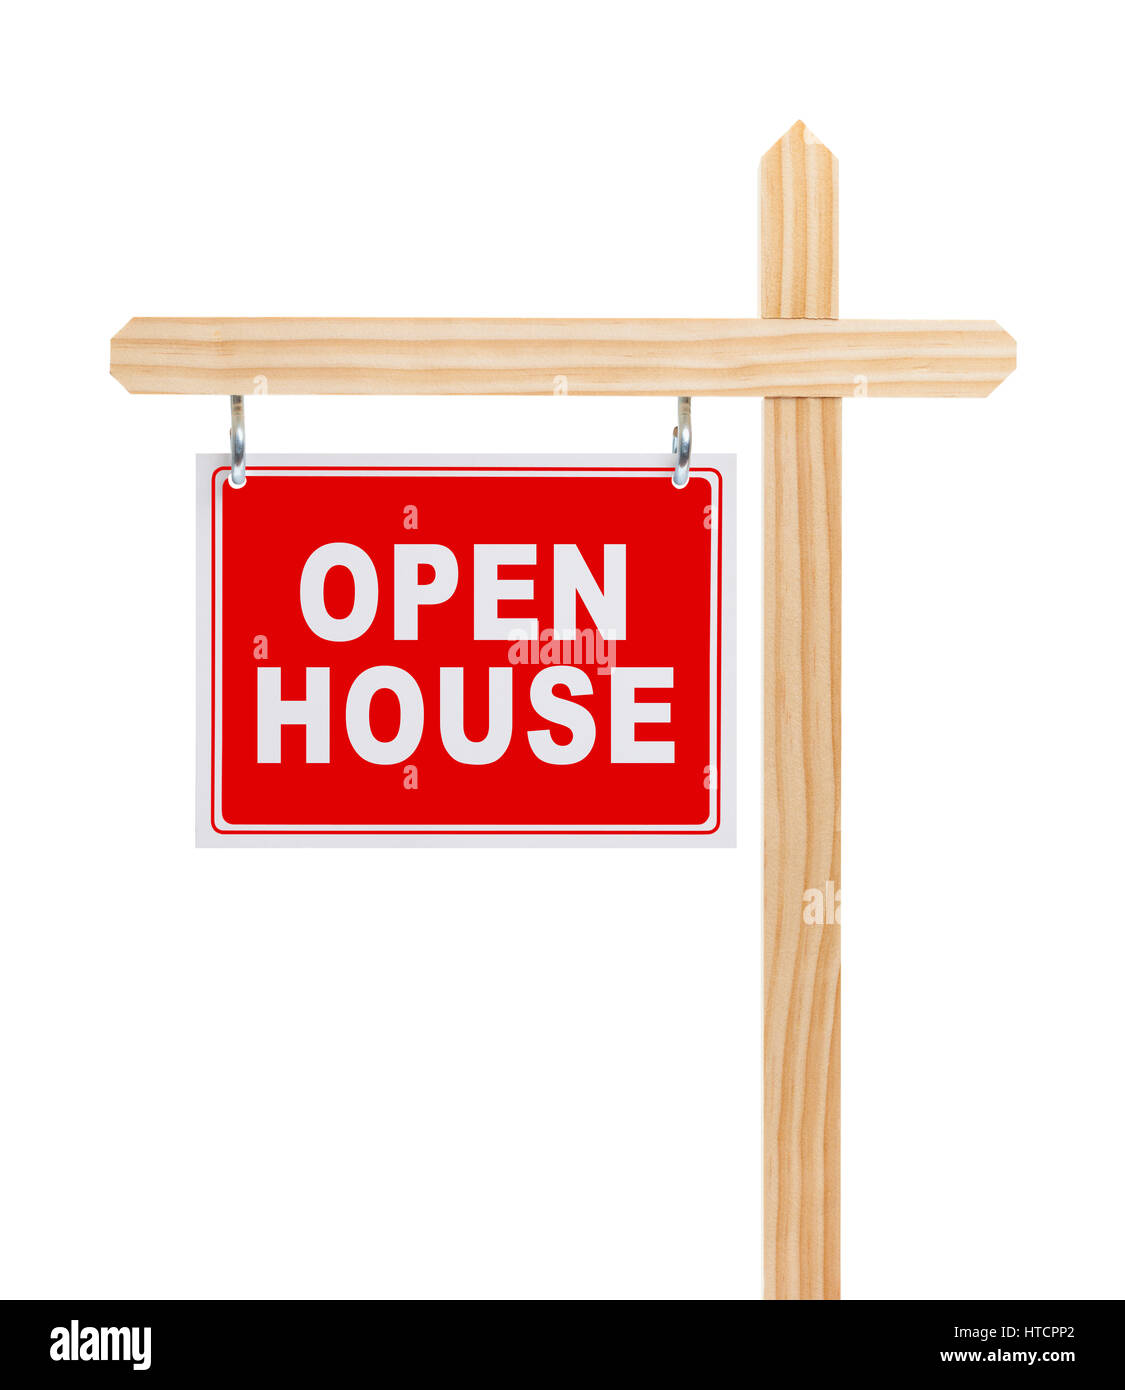 Open House Real Estate Sign Isolated on White Background. Stock Photo